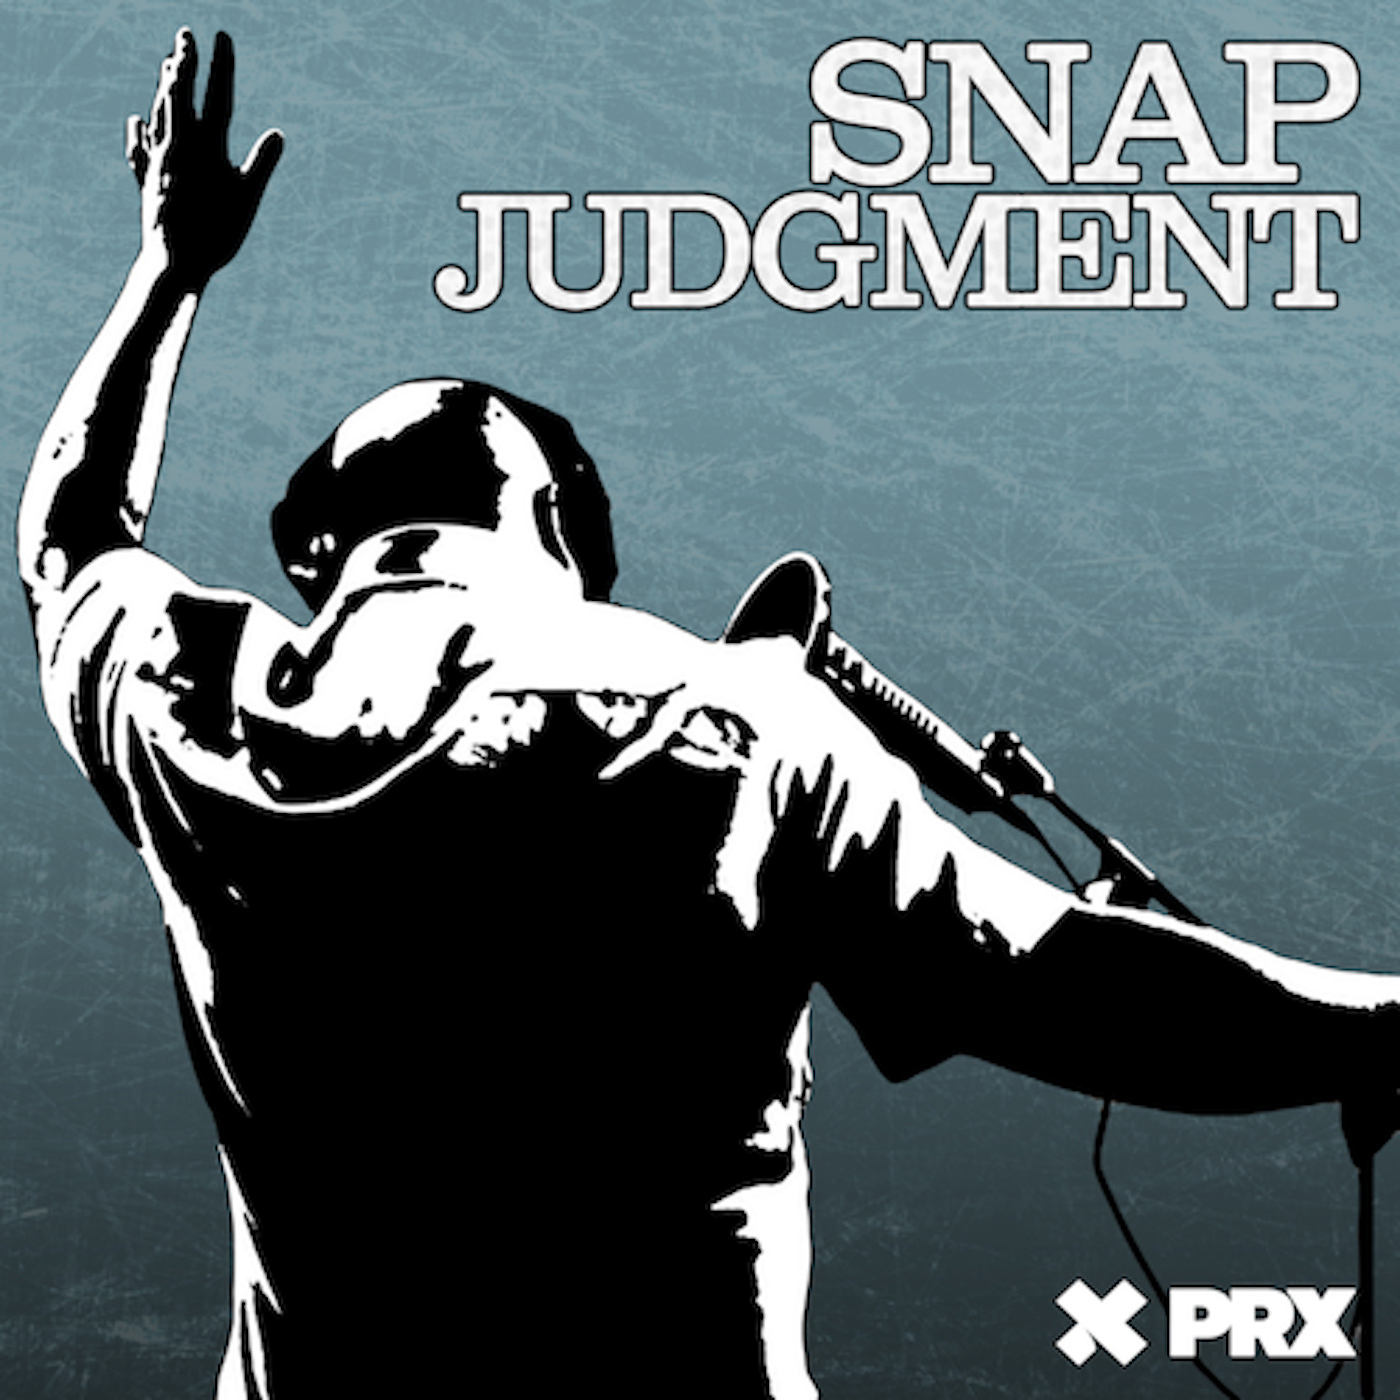 Snap Judgment:Snap Judgment and PRX